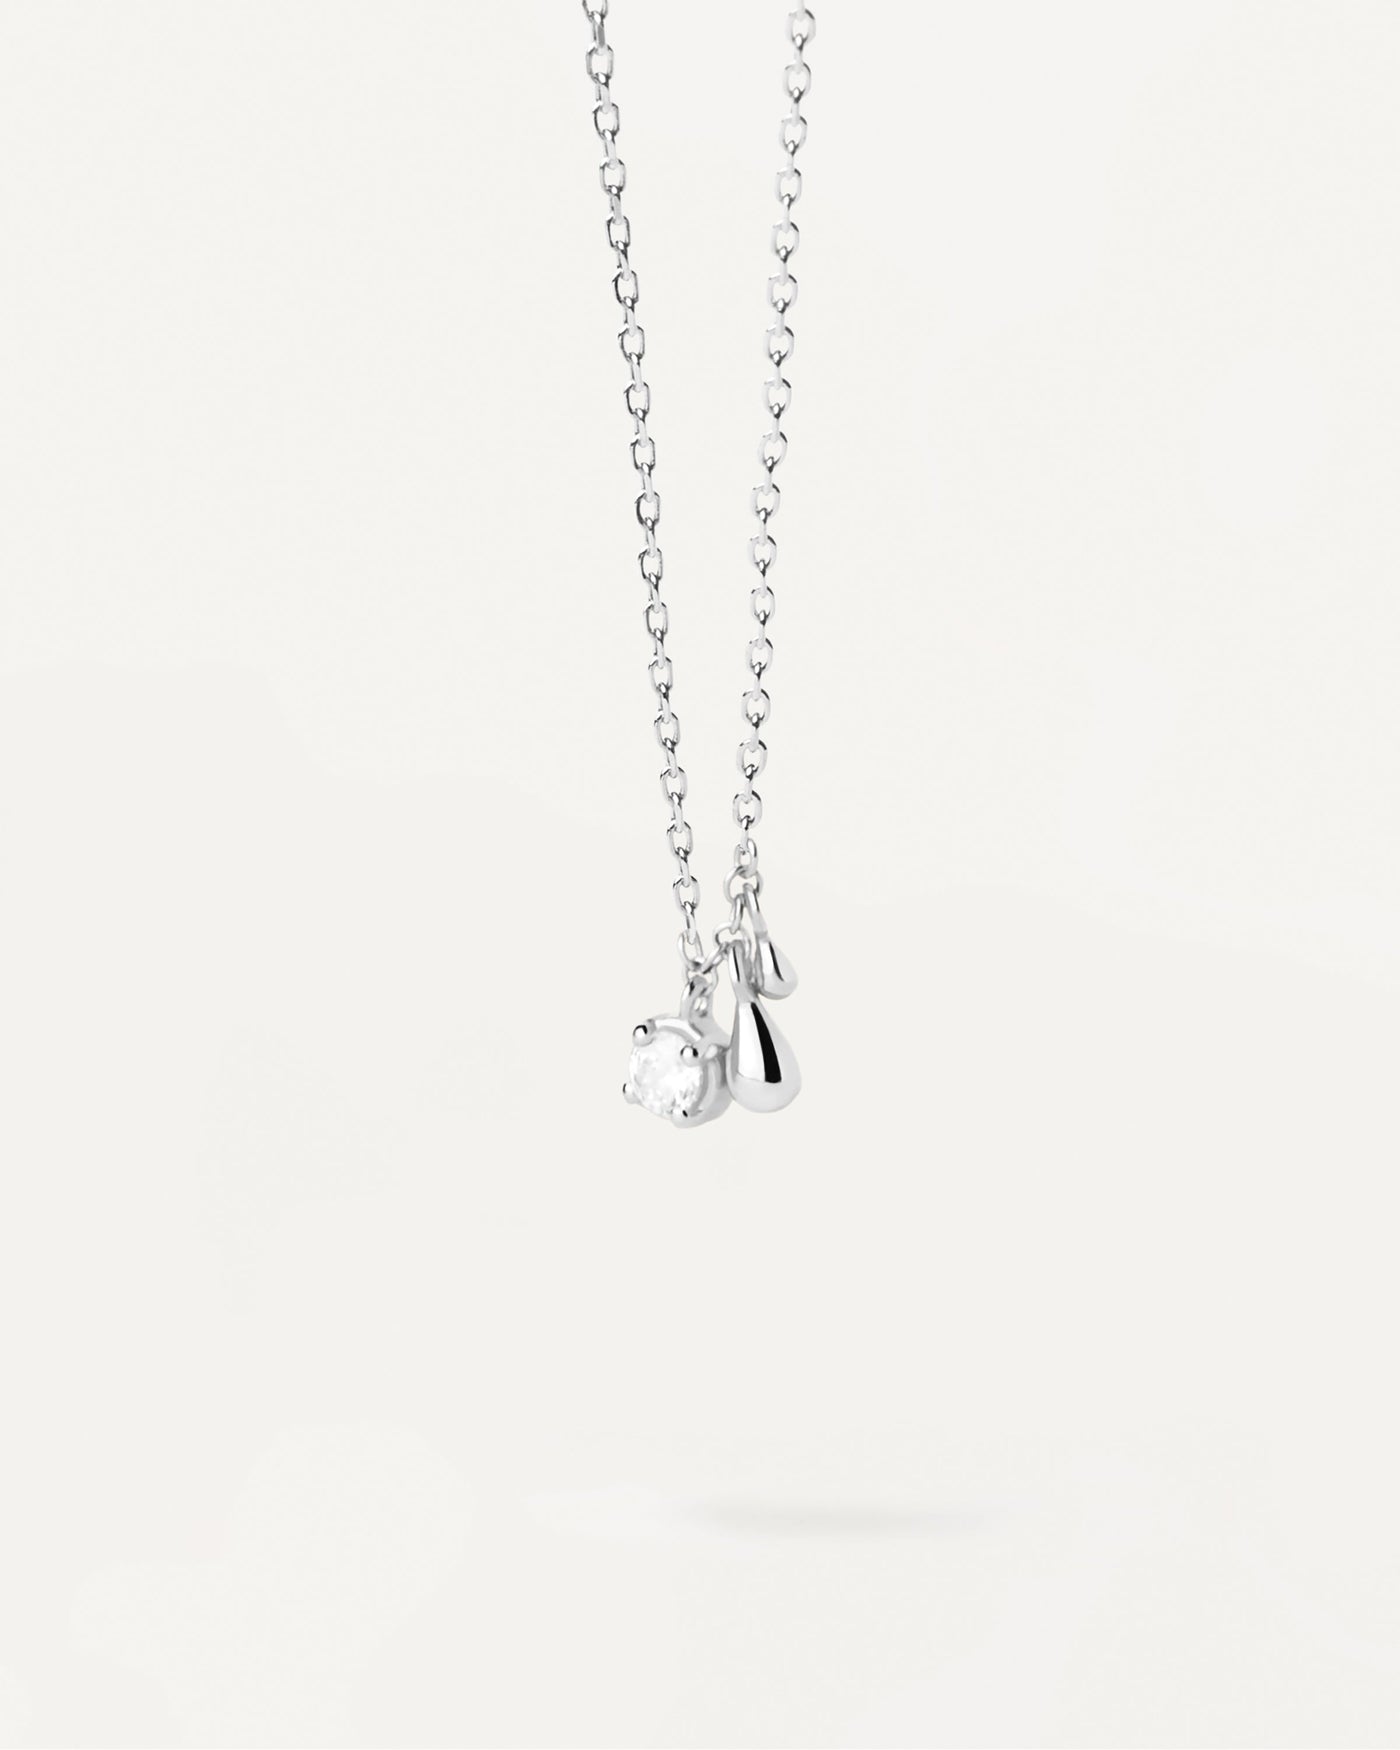 2023 Selection | Water Silver Necklace. Sterling silver necklace with white zirconia and two small drop pendants. Get the latest arrival from PDPAOLA. Place your order safely and get this Best Seller. Free Shipping.